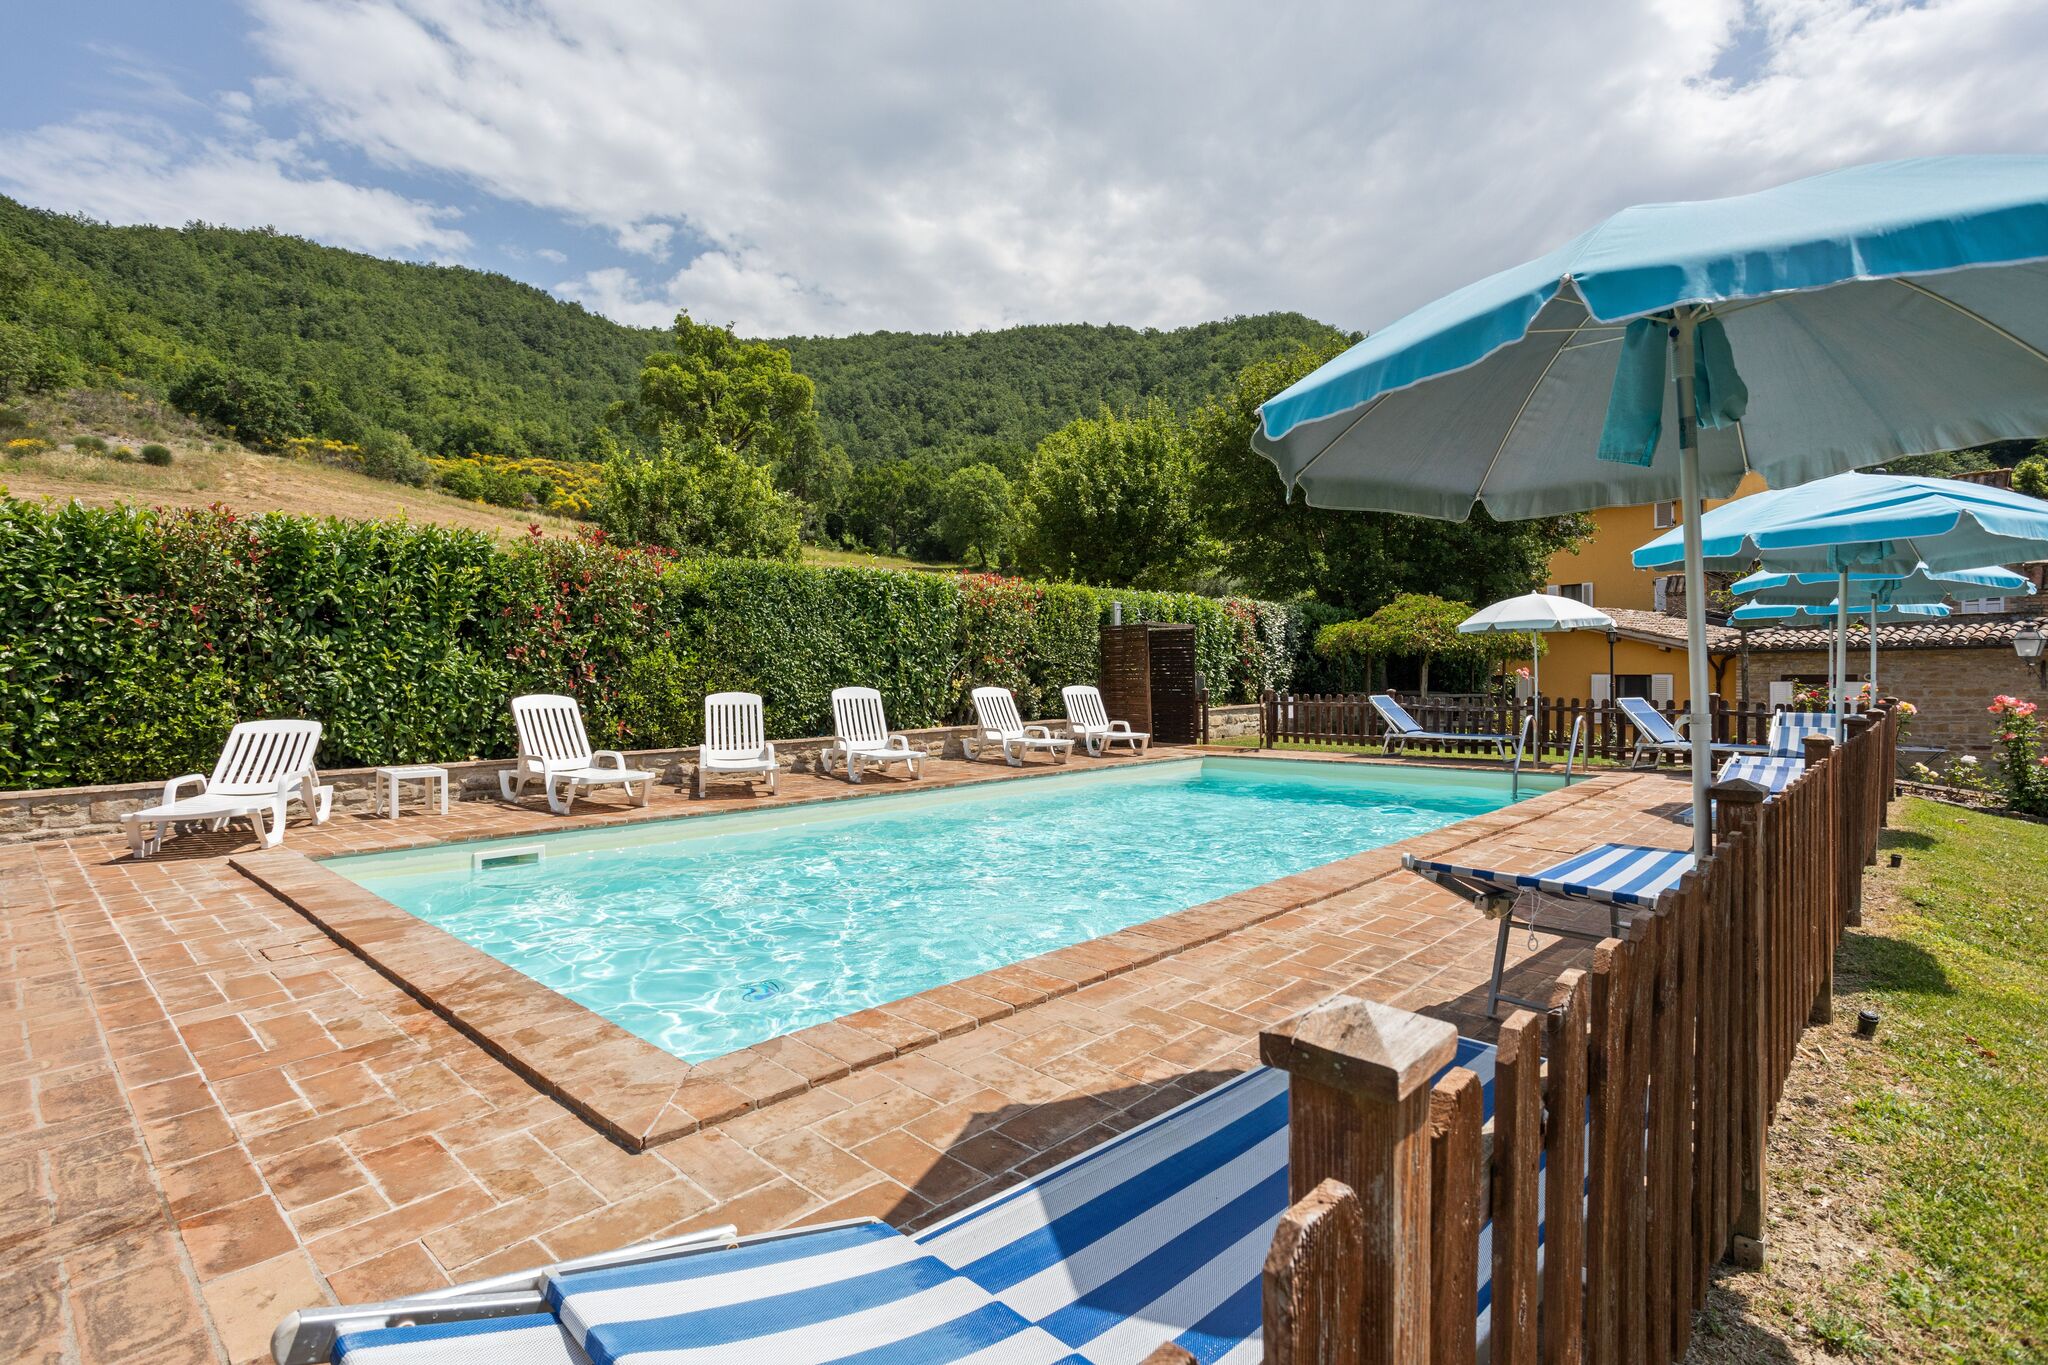 Holiday Home in Assisi with Pool, Terrace, Garden, Sun-loungers